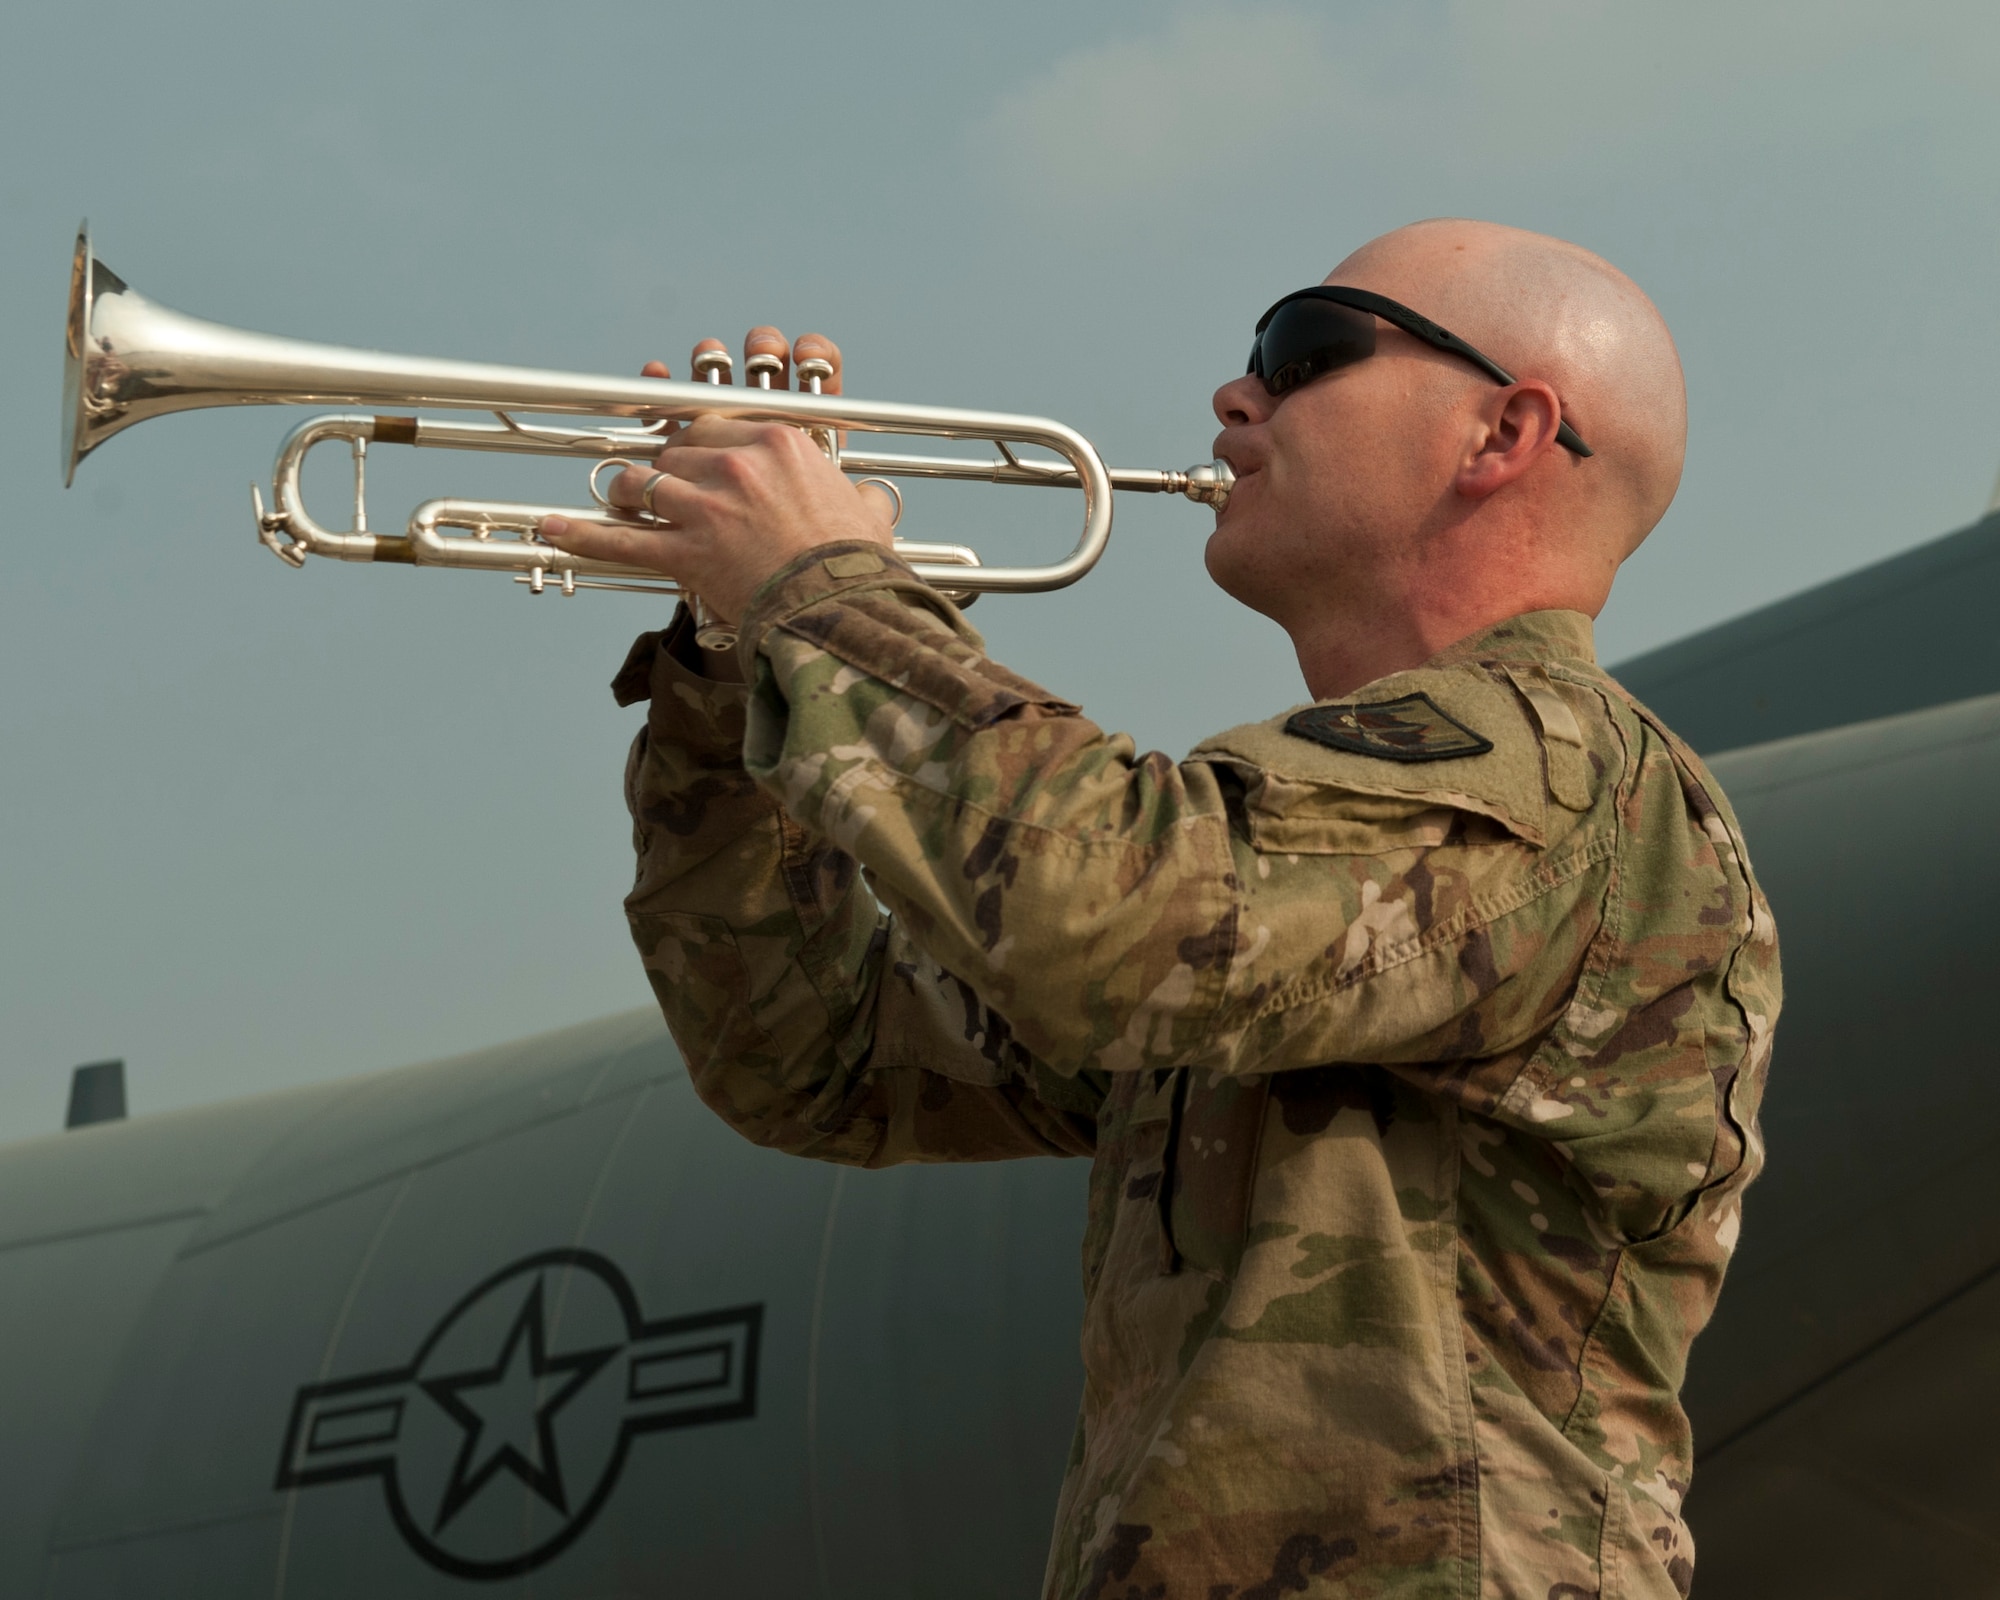 A bugle player with the U.S. Forces Afghanistan Band plays taps during the TORQE 62 remembrance ceremony, Bagram Airfield, Afghanistan, Oct. 2, 2016. The ceremony was held to honor and remember those lost when TORQE 62 crashed on Oct. 2, 2015. (U.S. Air Force photo by Capt. Korey Fratini)